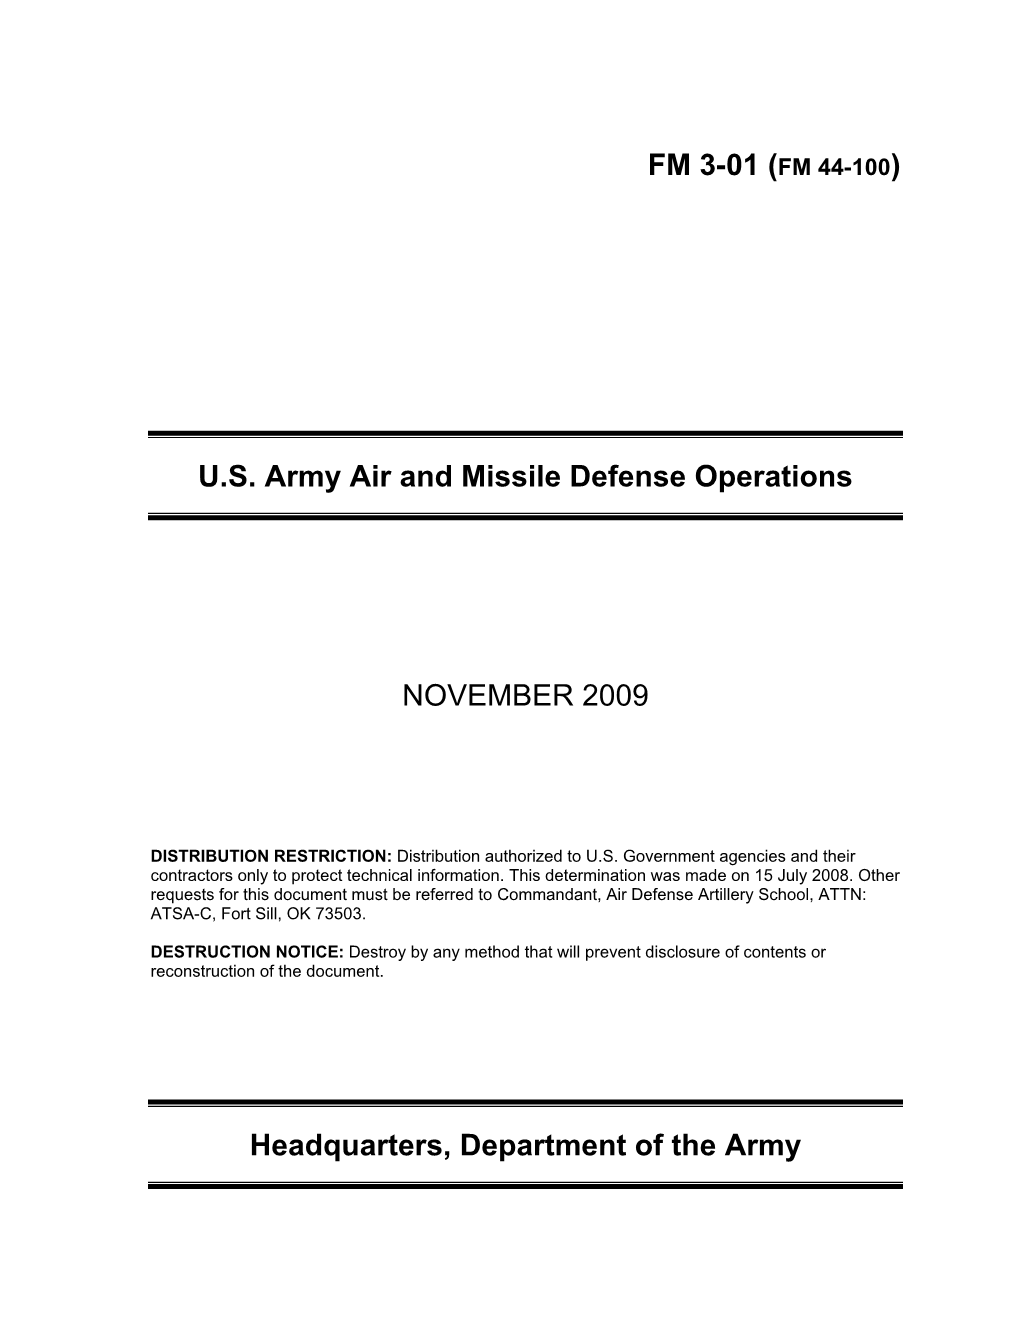 (FM 44-100) US Army Air and Missile Defense Operations NOVEMBER